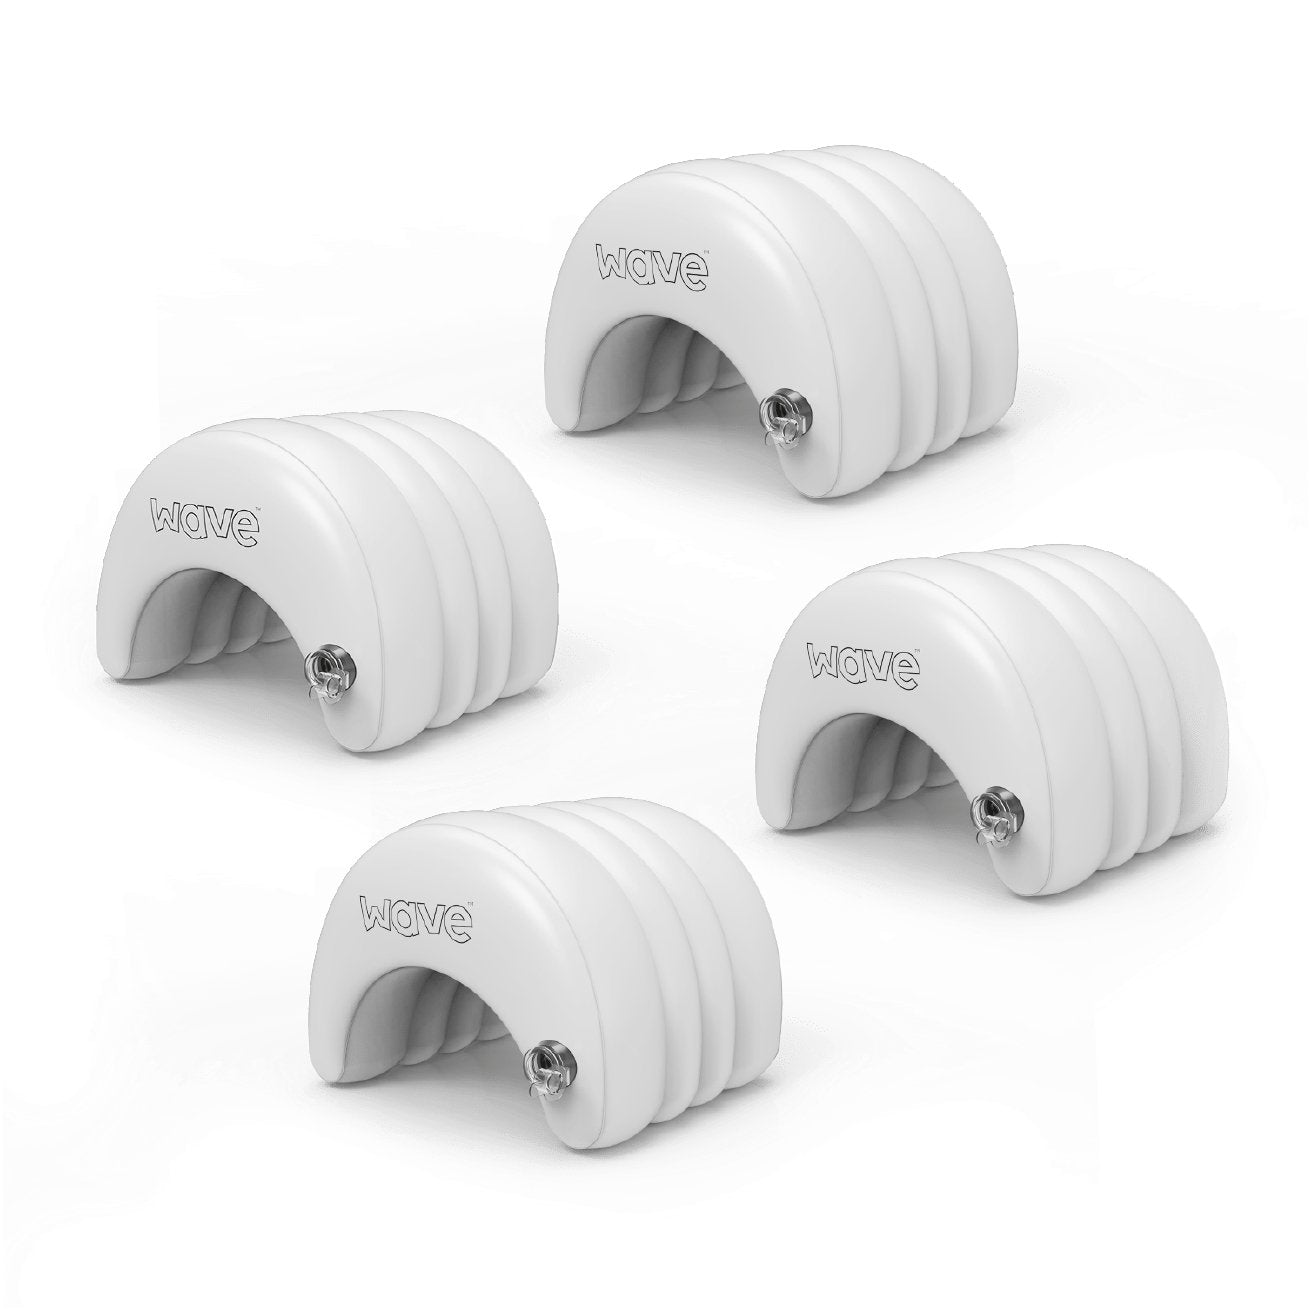 Inflatable Spa Head Rest Pillow | 4 Pack | White - Wave Spas Europe